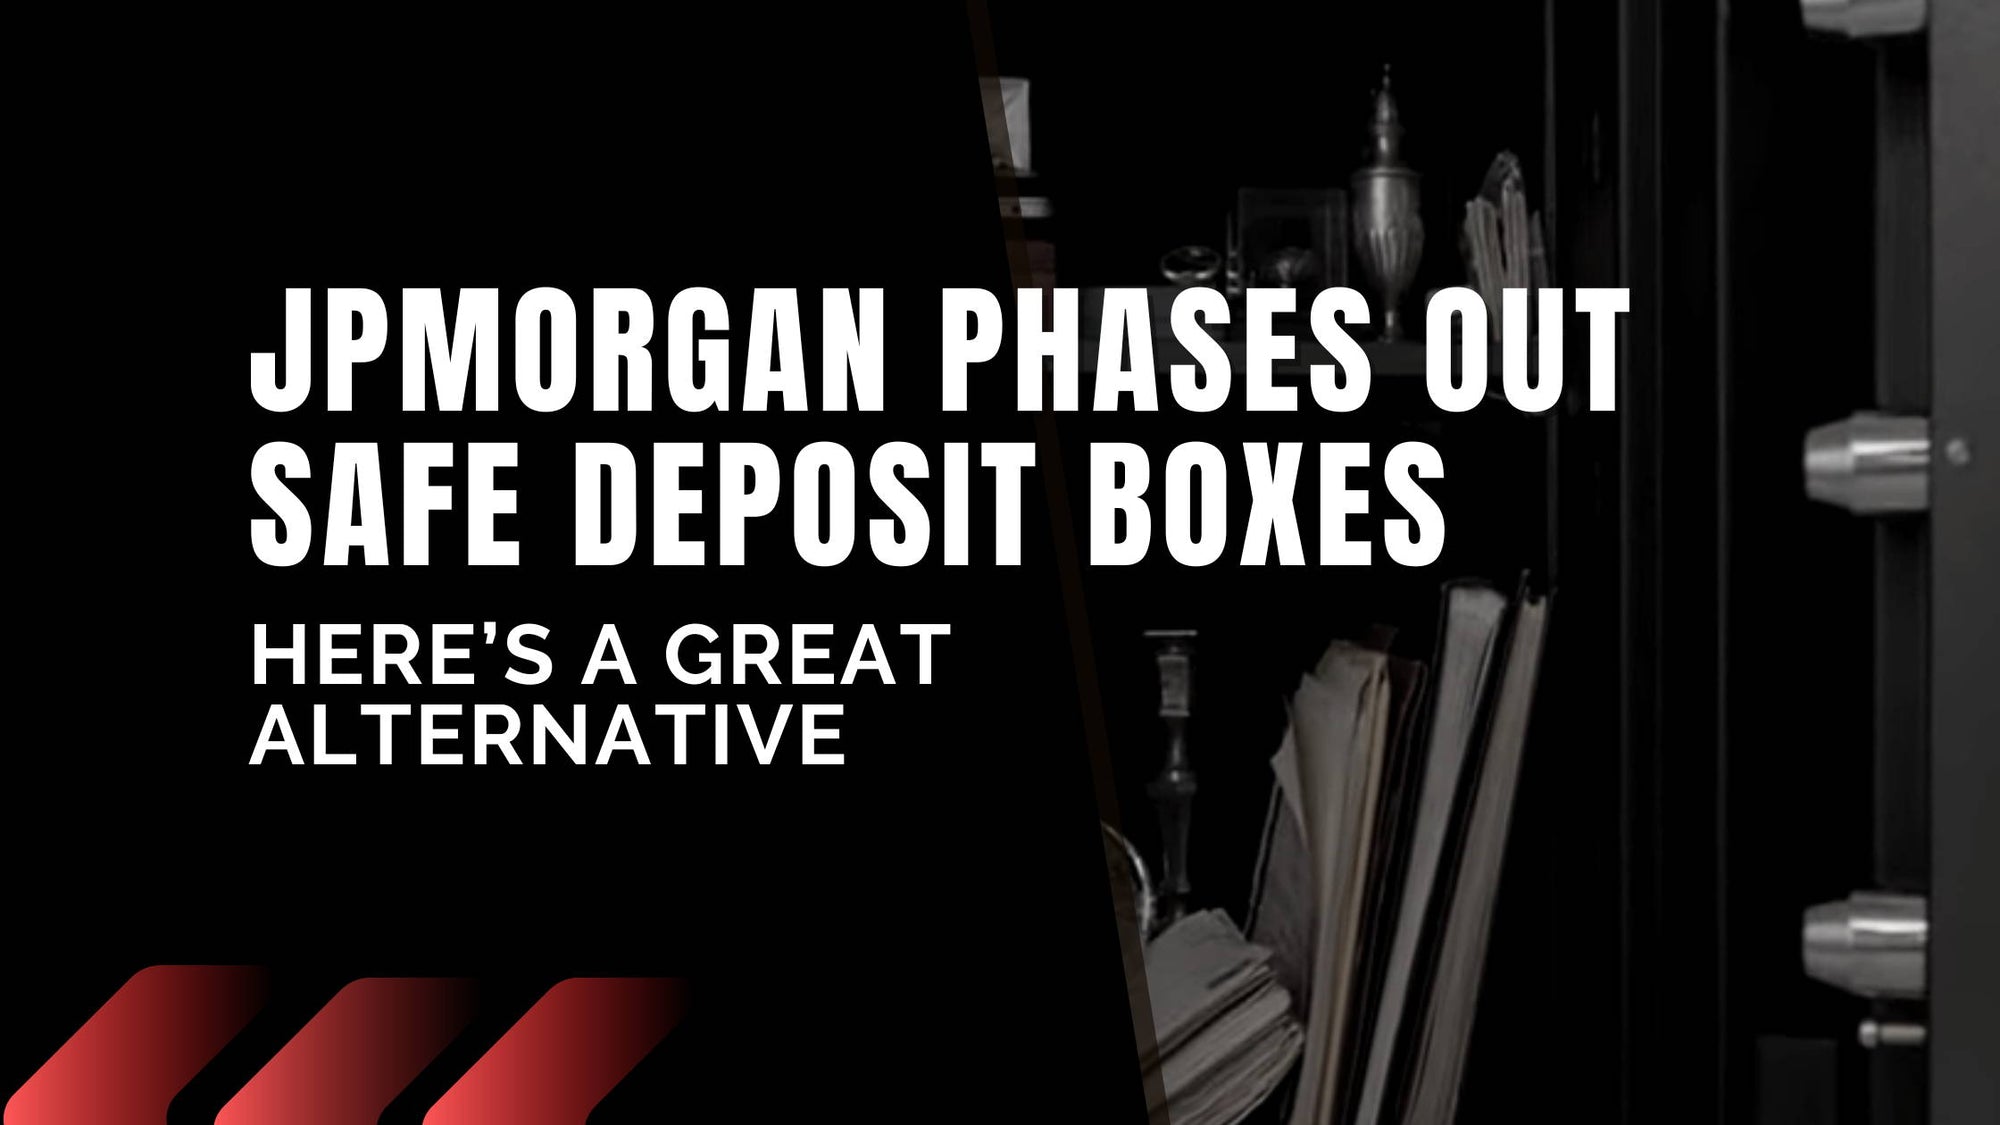 JPMorgan Phases Out Safe Deposit Boxes—Here’s a Great Alternative